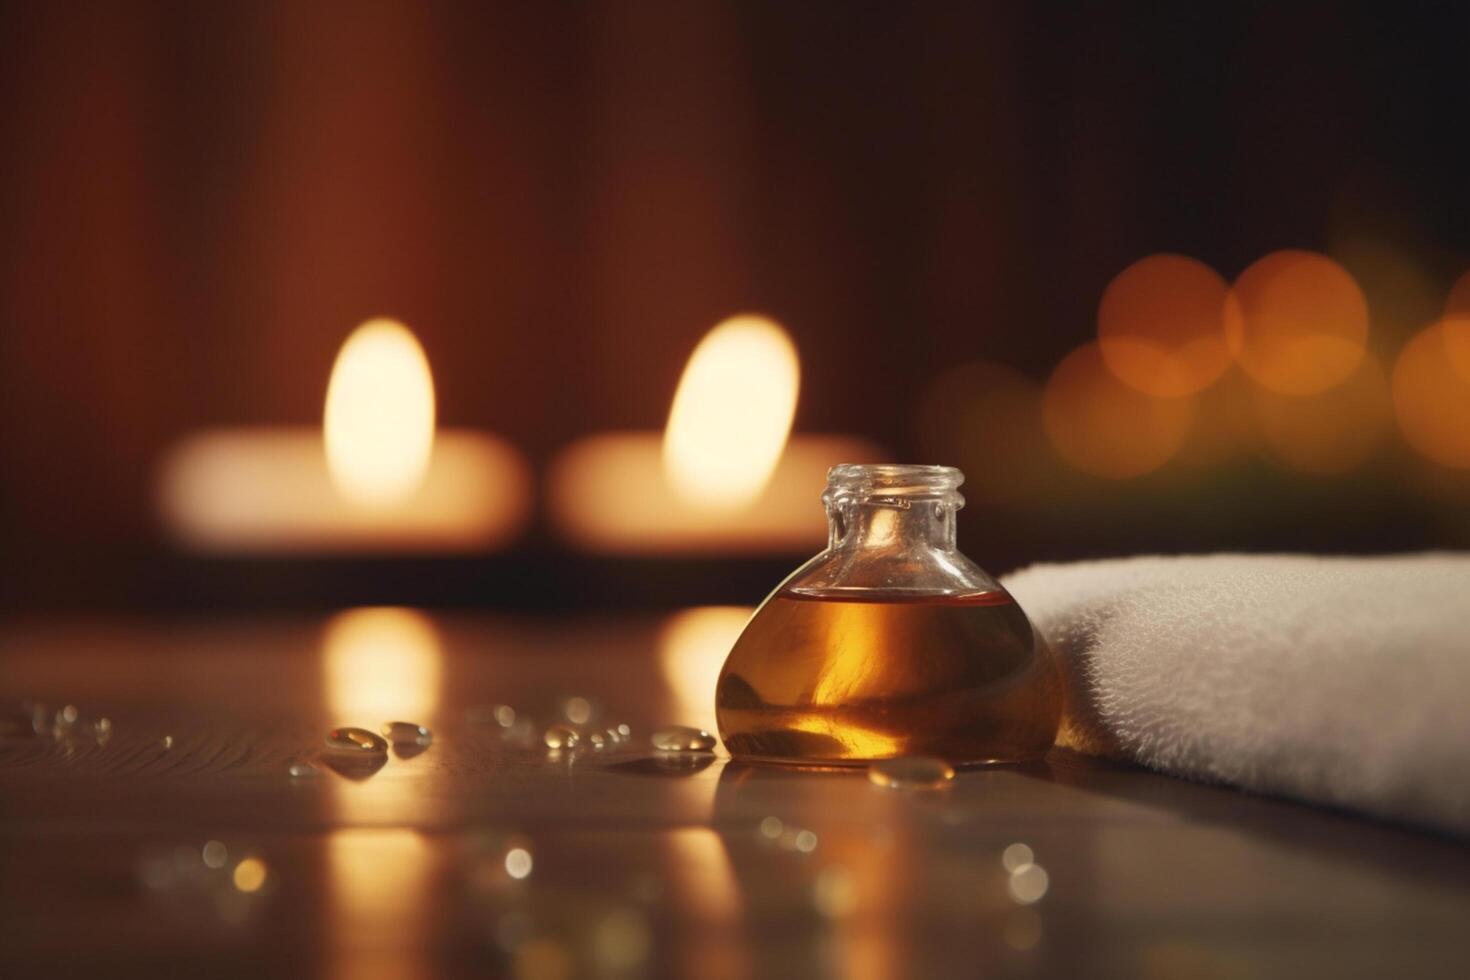 Soothing Candlelight Massage in Relaxation Room at Spa photo